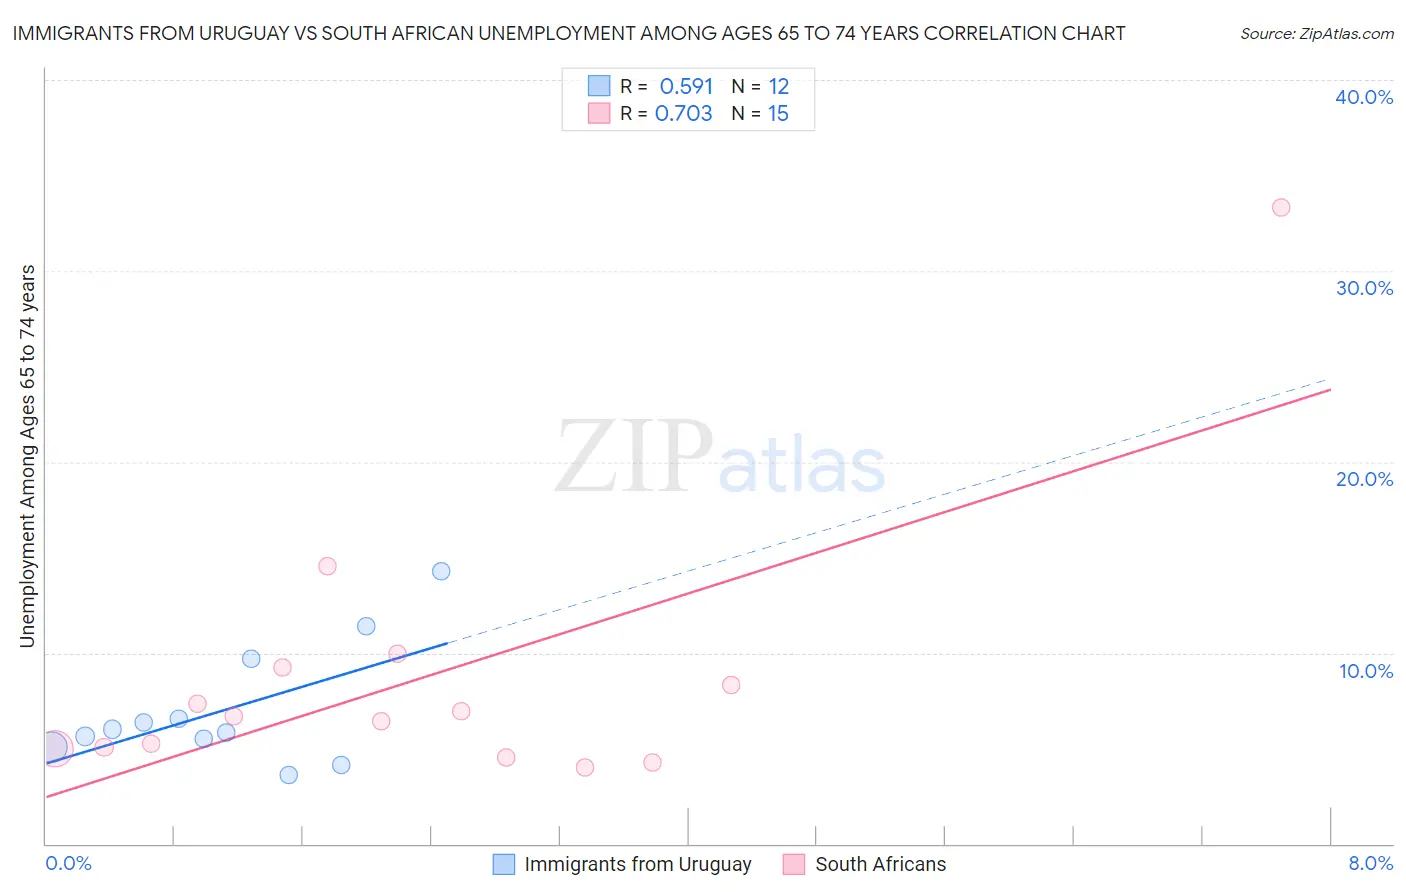 Immigrants from Uruguay vs South African Unemployment Among Ages 65 to 74 years